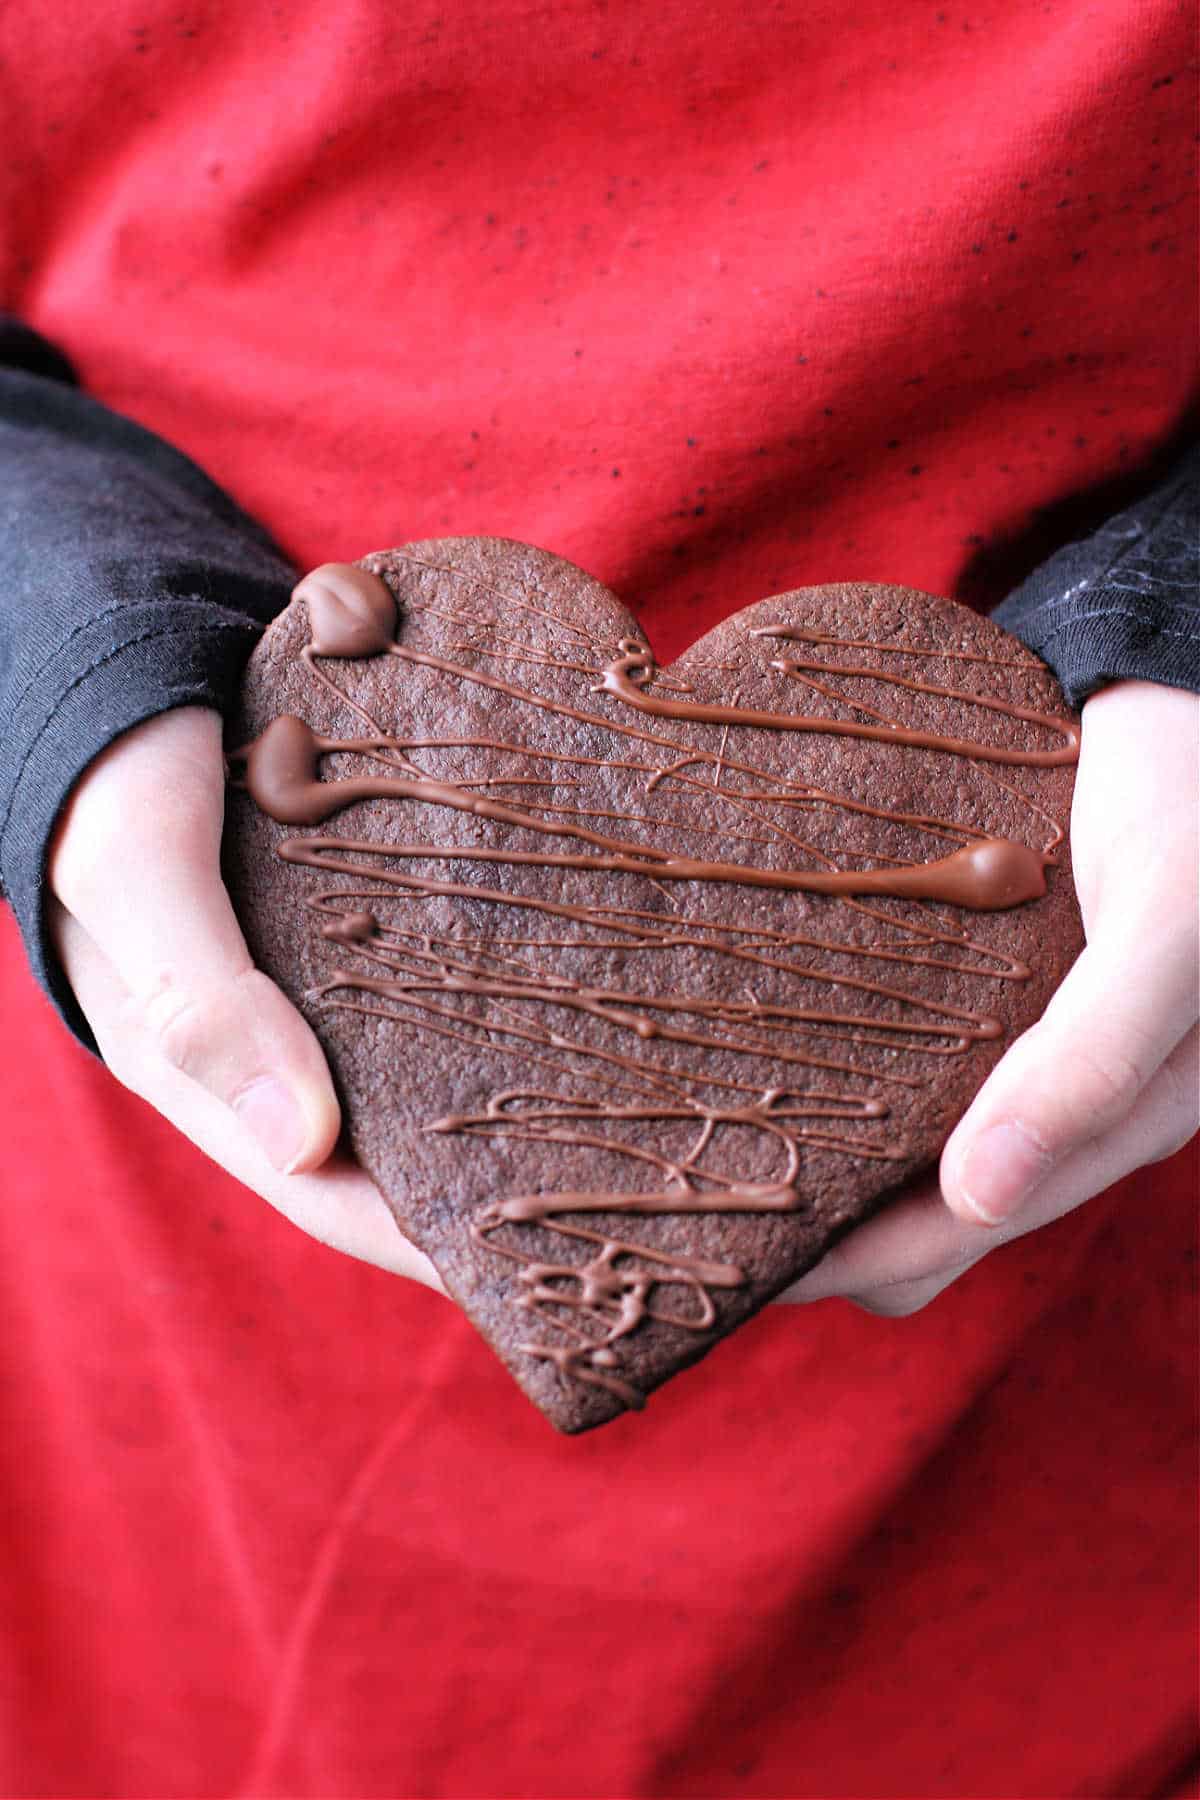 large heart shaped chocolate sugar cookie being held in a person's hands